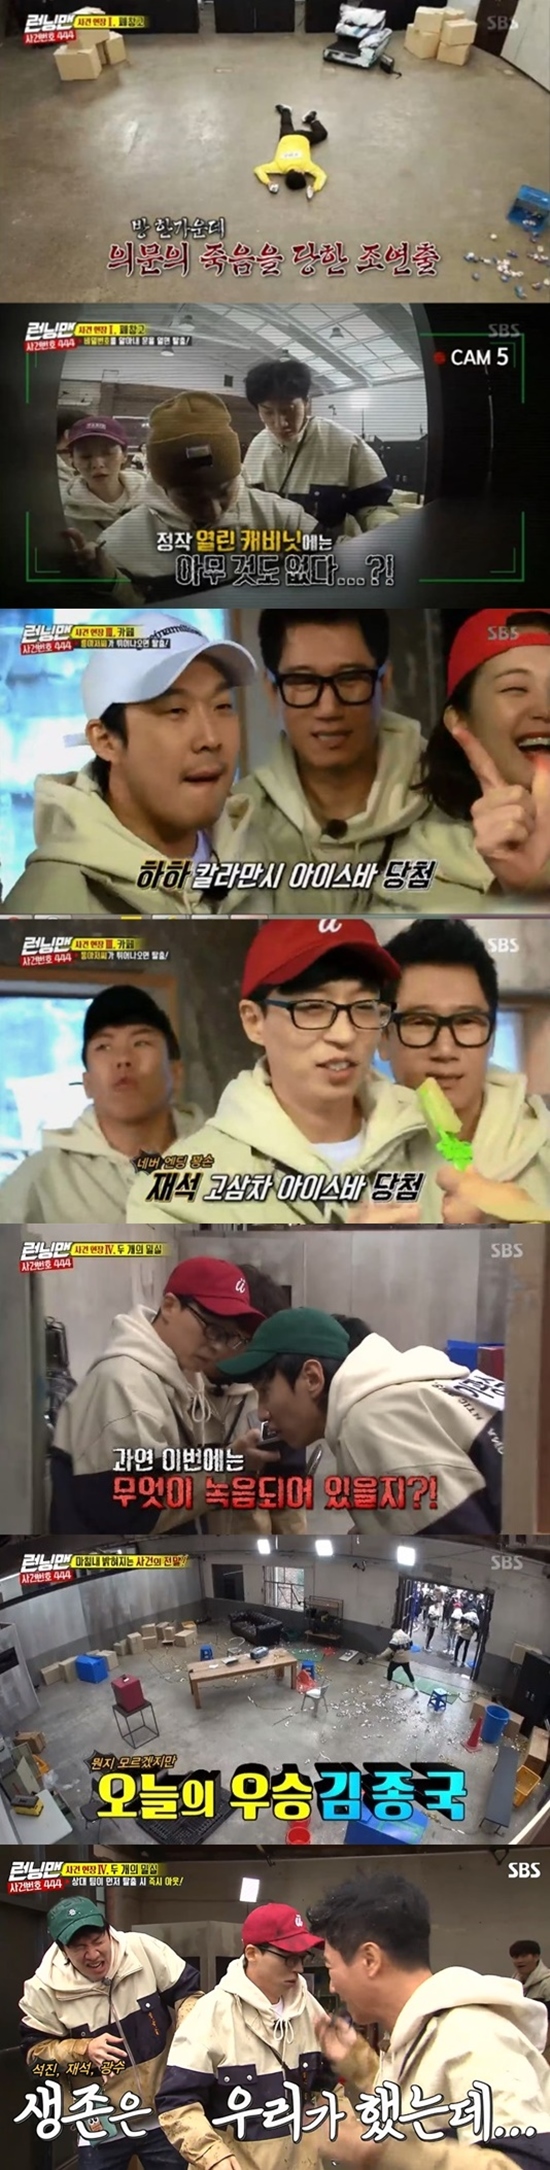 Running Man kept the top spot in 2049 ratings.SBS Running Man, which was broadcast on the 24th, recorded 4% of 2049 target audience rating, which is an important indicator of major advertising officials, and it was ranked first in the same time zone, followed by Ugly Our Little and Death Master.(Nilson Korea, based on the second part of the audience rating of households in the Seoul metropolitan area)On this day, the broadcast was featured in the race Case Number 444, which is looking for the sign of the supporting actor A who was questioned.The members of the waste warehouse had to find the killer who had outed the supporting cast A until sunset; the evidence was collected one by one, and they learned that Song Ji-hyo shoes had a password.Song Ji-hyo was suspected of being the culprit, but the members carried out the mission in turn and got hints.The Ji Suk-jin team and the Song Ji-hyo team were divided into a team confrontation that had to find out the criminal first.Yoo Jae-Suk, who combined hints of numerous missions, shouted that the identity of the criminal was fine dust and was ordered to escape the room by three people except for the person who pulled the lever on the last mission.Kim Jong-kook pulled the lever in urgency, and Yoo Jae-Suk, Lee Kwang-soo and Ji Suk-jin escaped the room but the result was Kim Jong-kooks victory, which remained in the room.The three who betrayed their team members were hit by a water bomb, which recorded a highest audience rating of 8.4 percent per minute, taking the best minute.Running Man is broadcast every Sunday at 5 p.m.Photo = SBS Broadcasting Screen